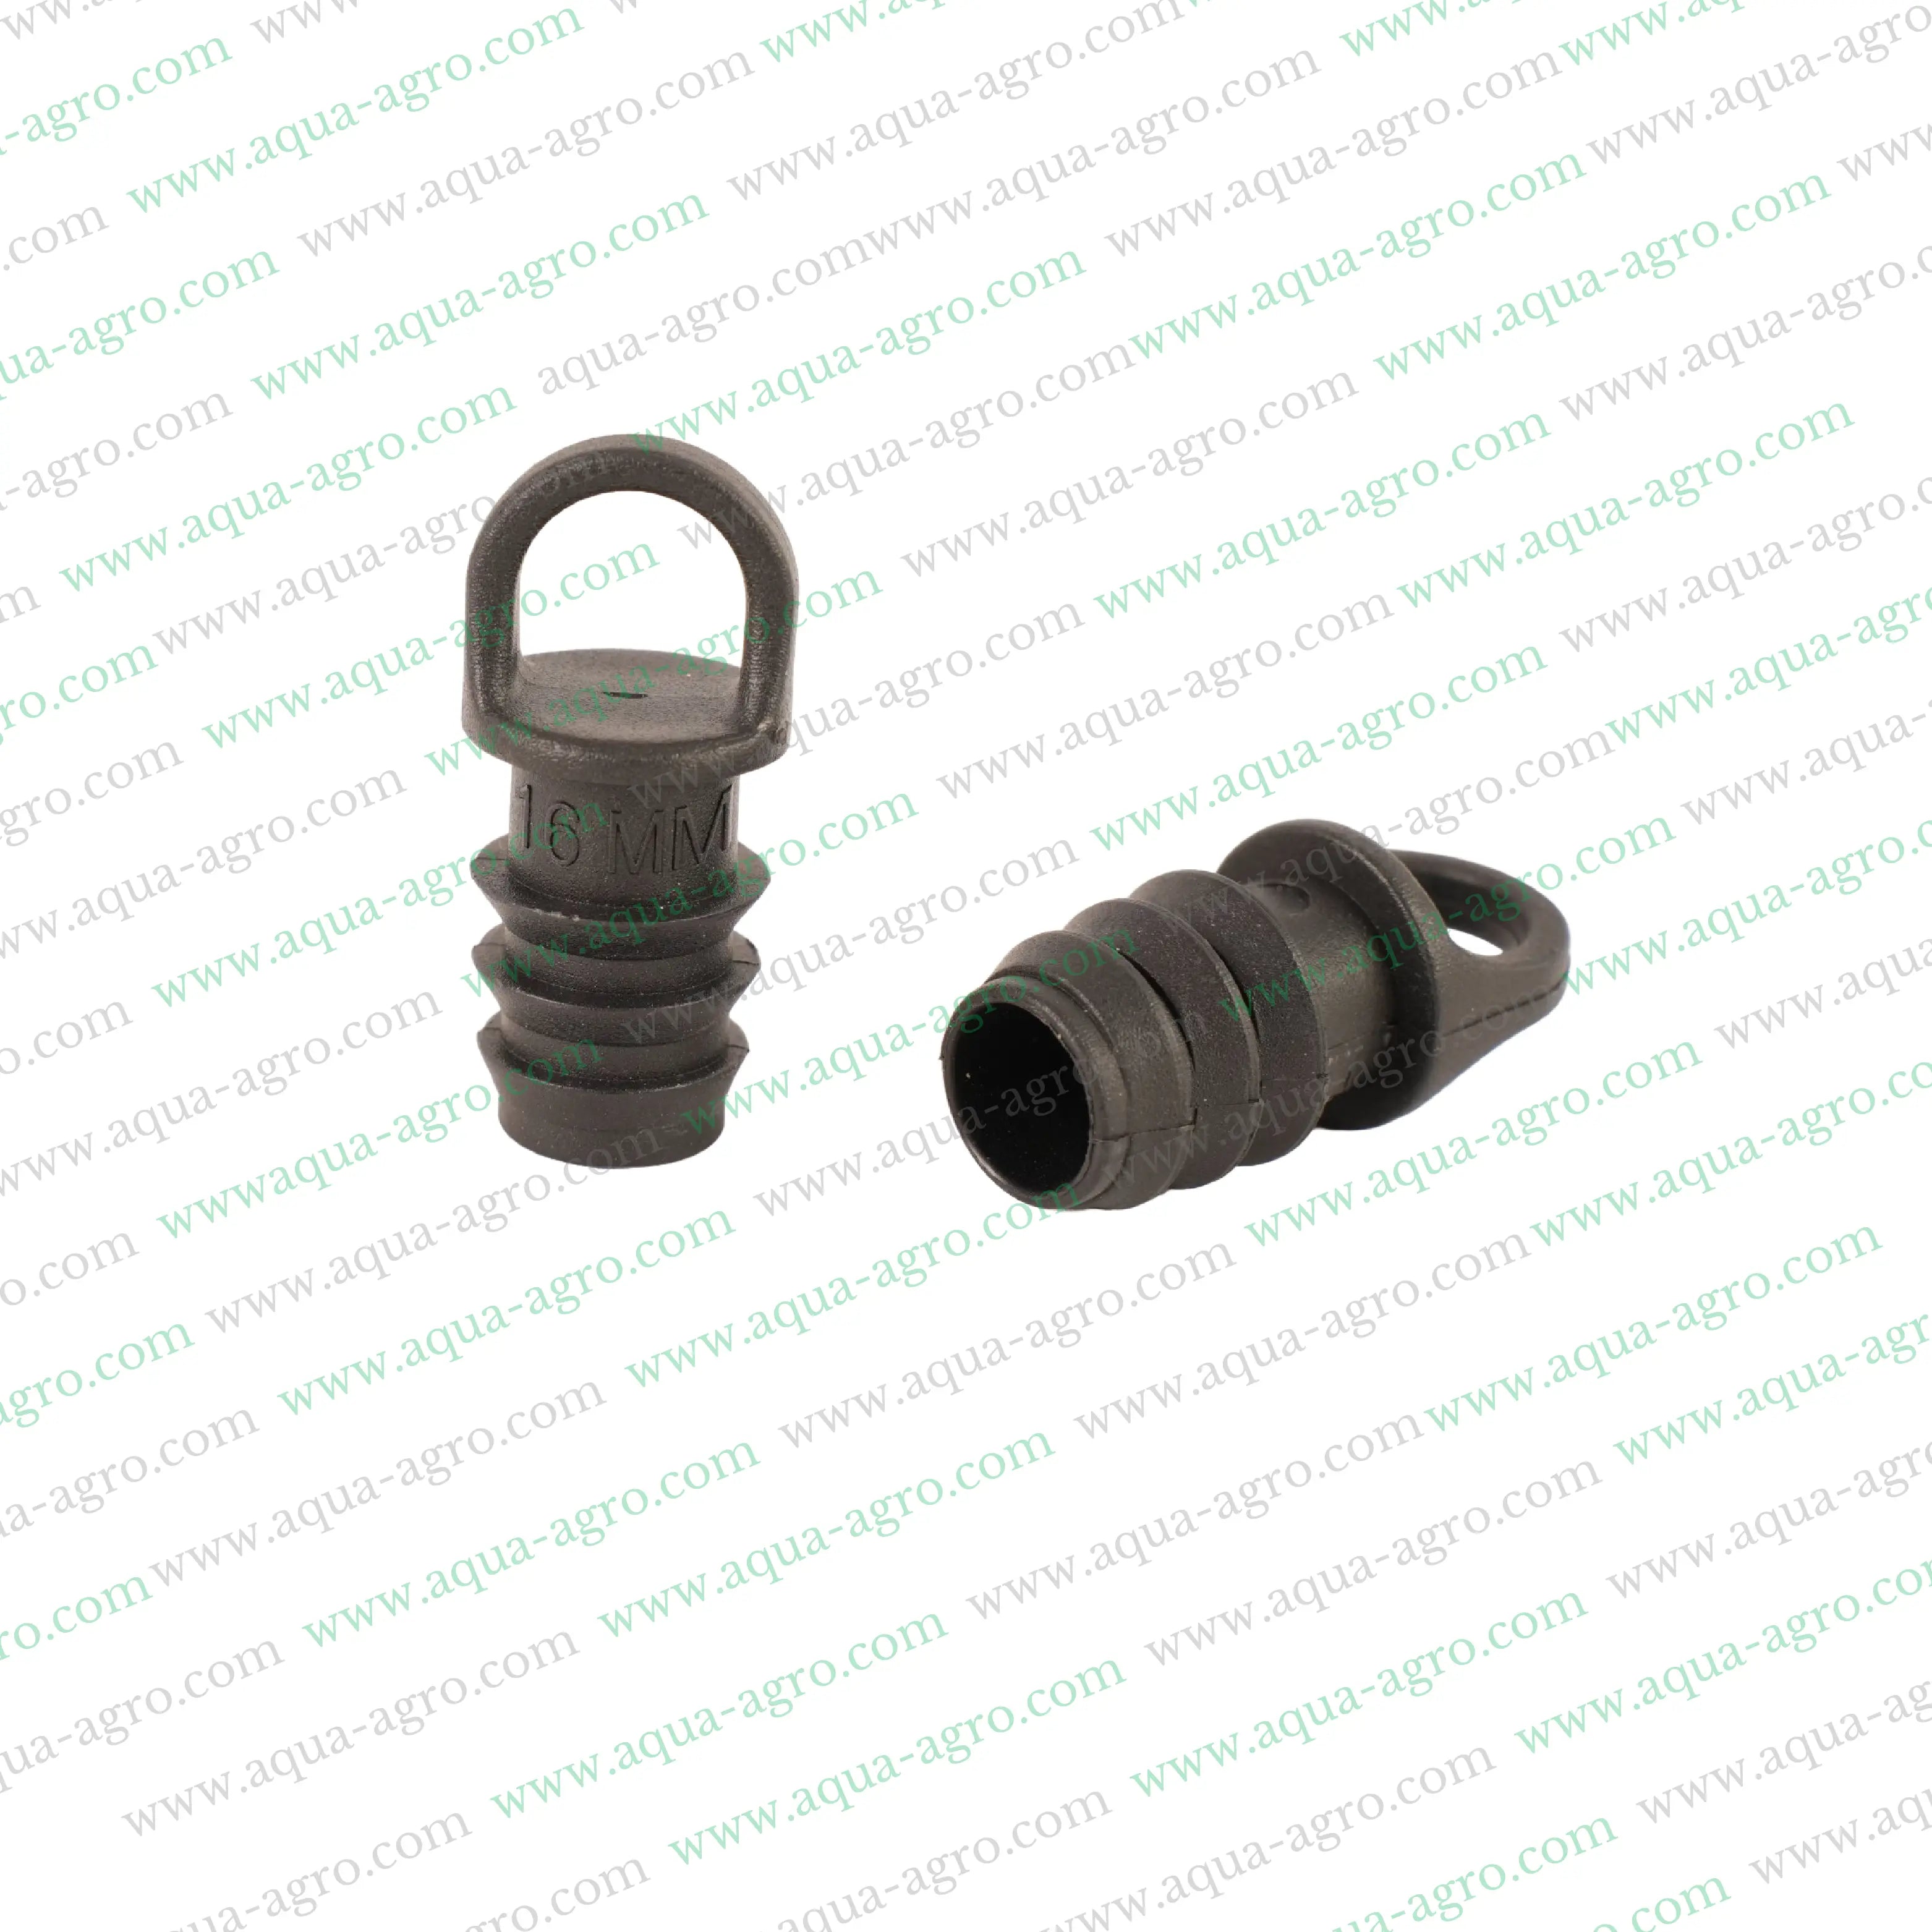 AQUA - AGRO | Drip Fittings And Accessories - Barbed Fittings - Lite - Barbed End Clamp - 16mm